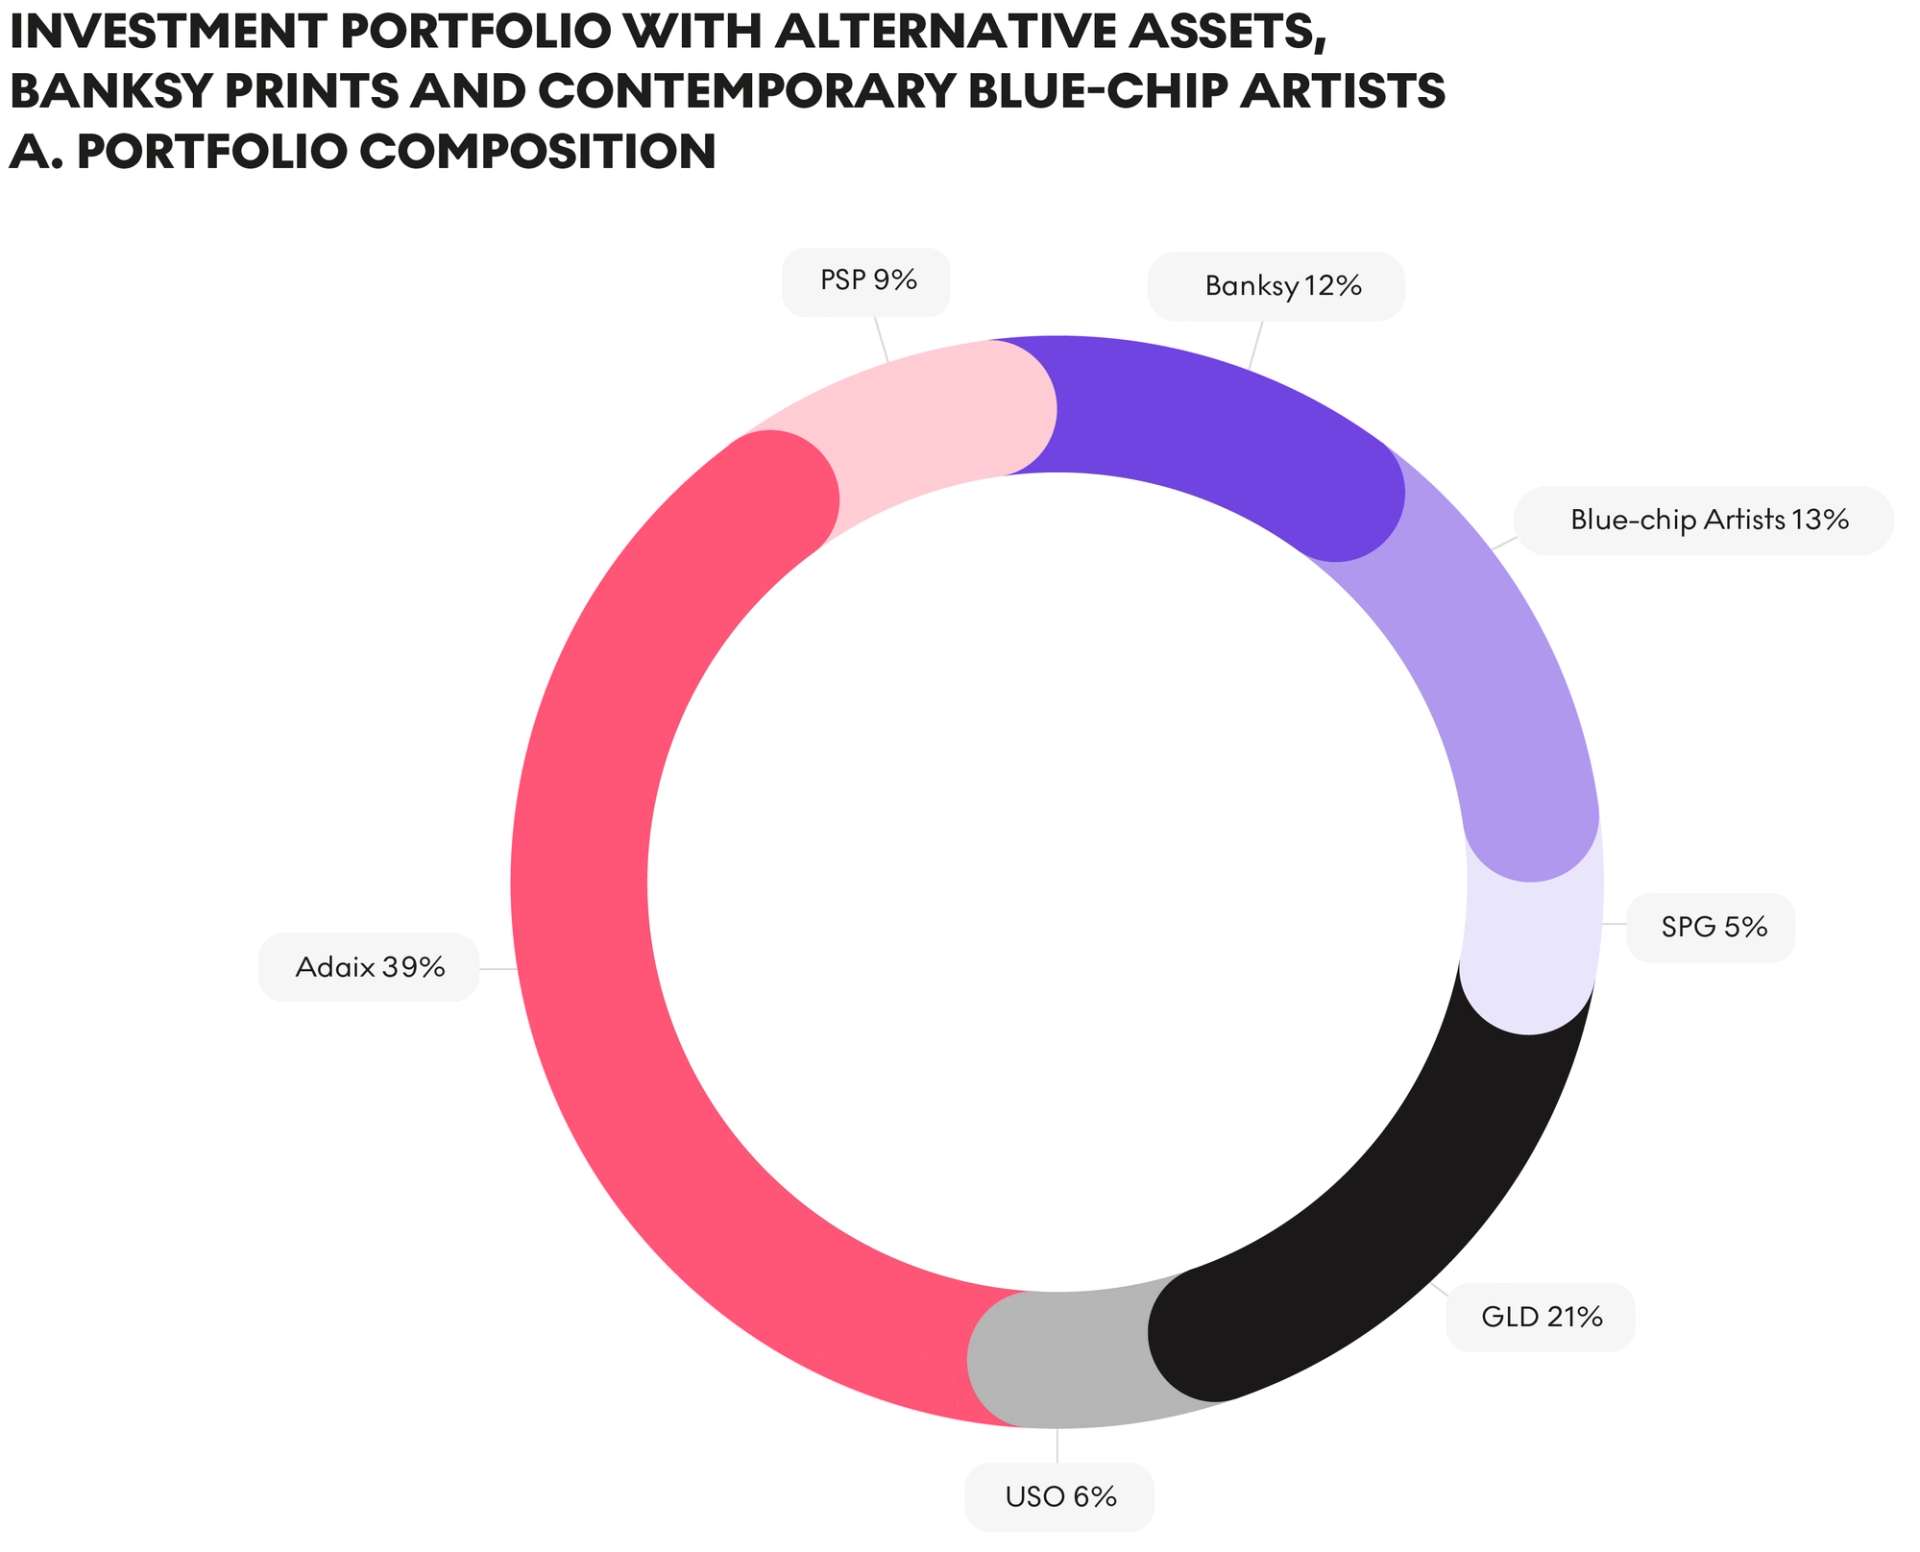 Composition of Investment Portfolio with Alternative Assets, Banksy Prints and Contemporary Blue-Chip Artists - MyArtBroker